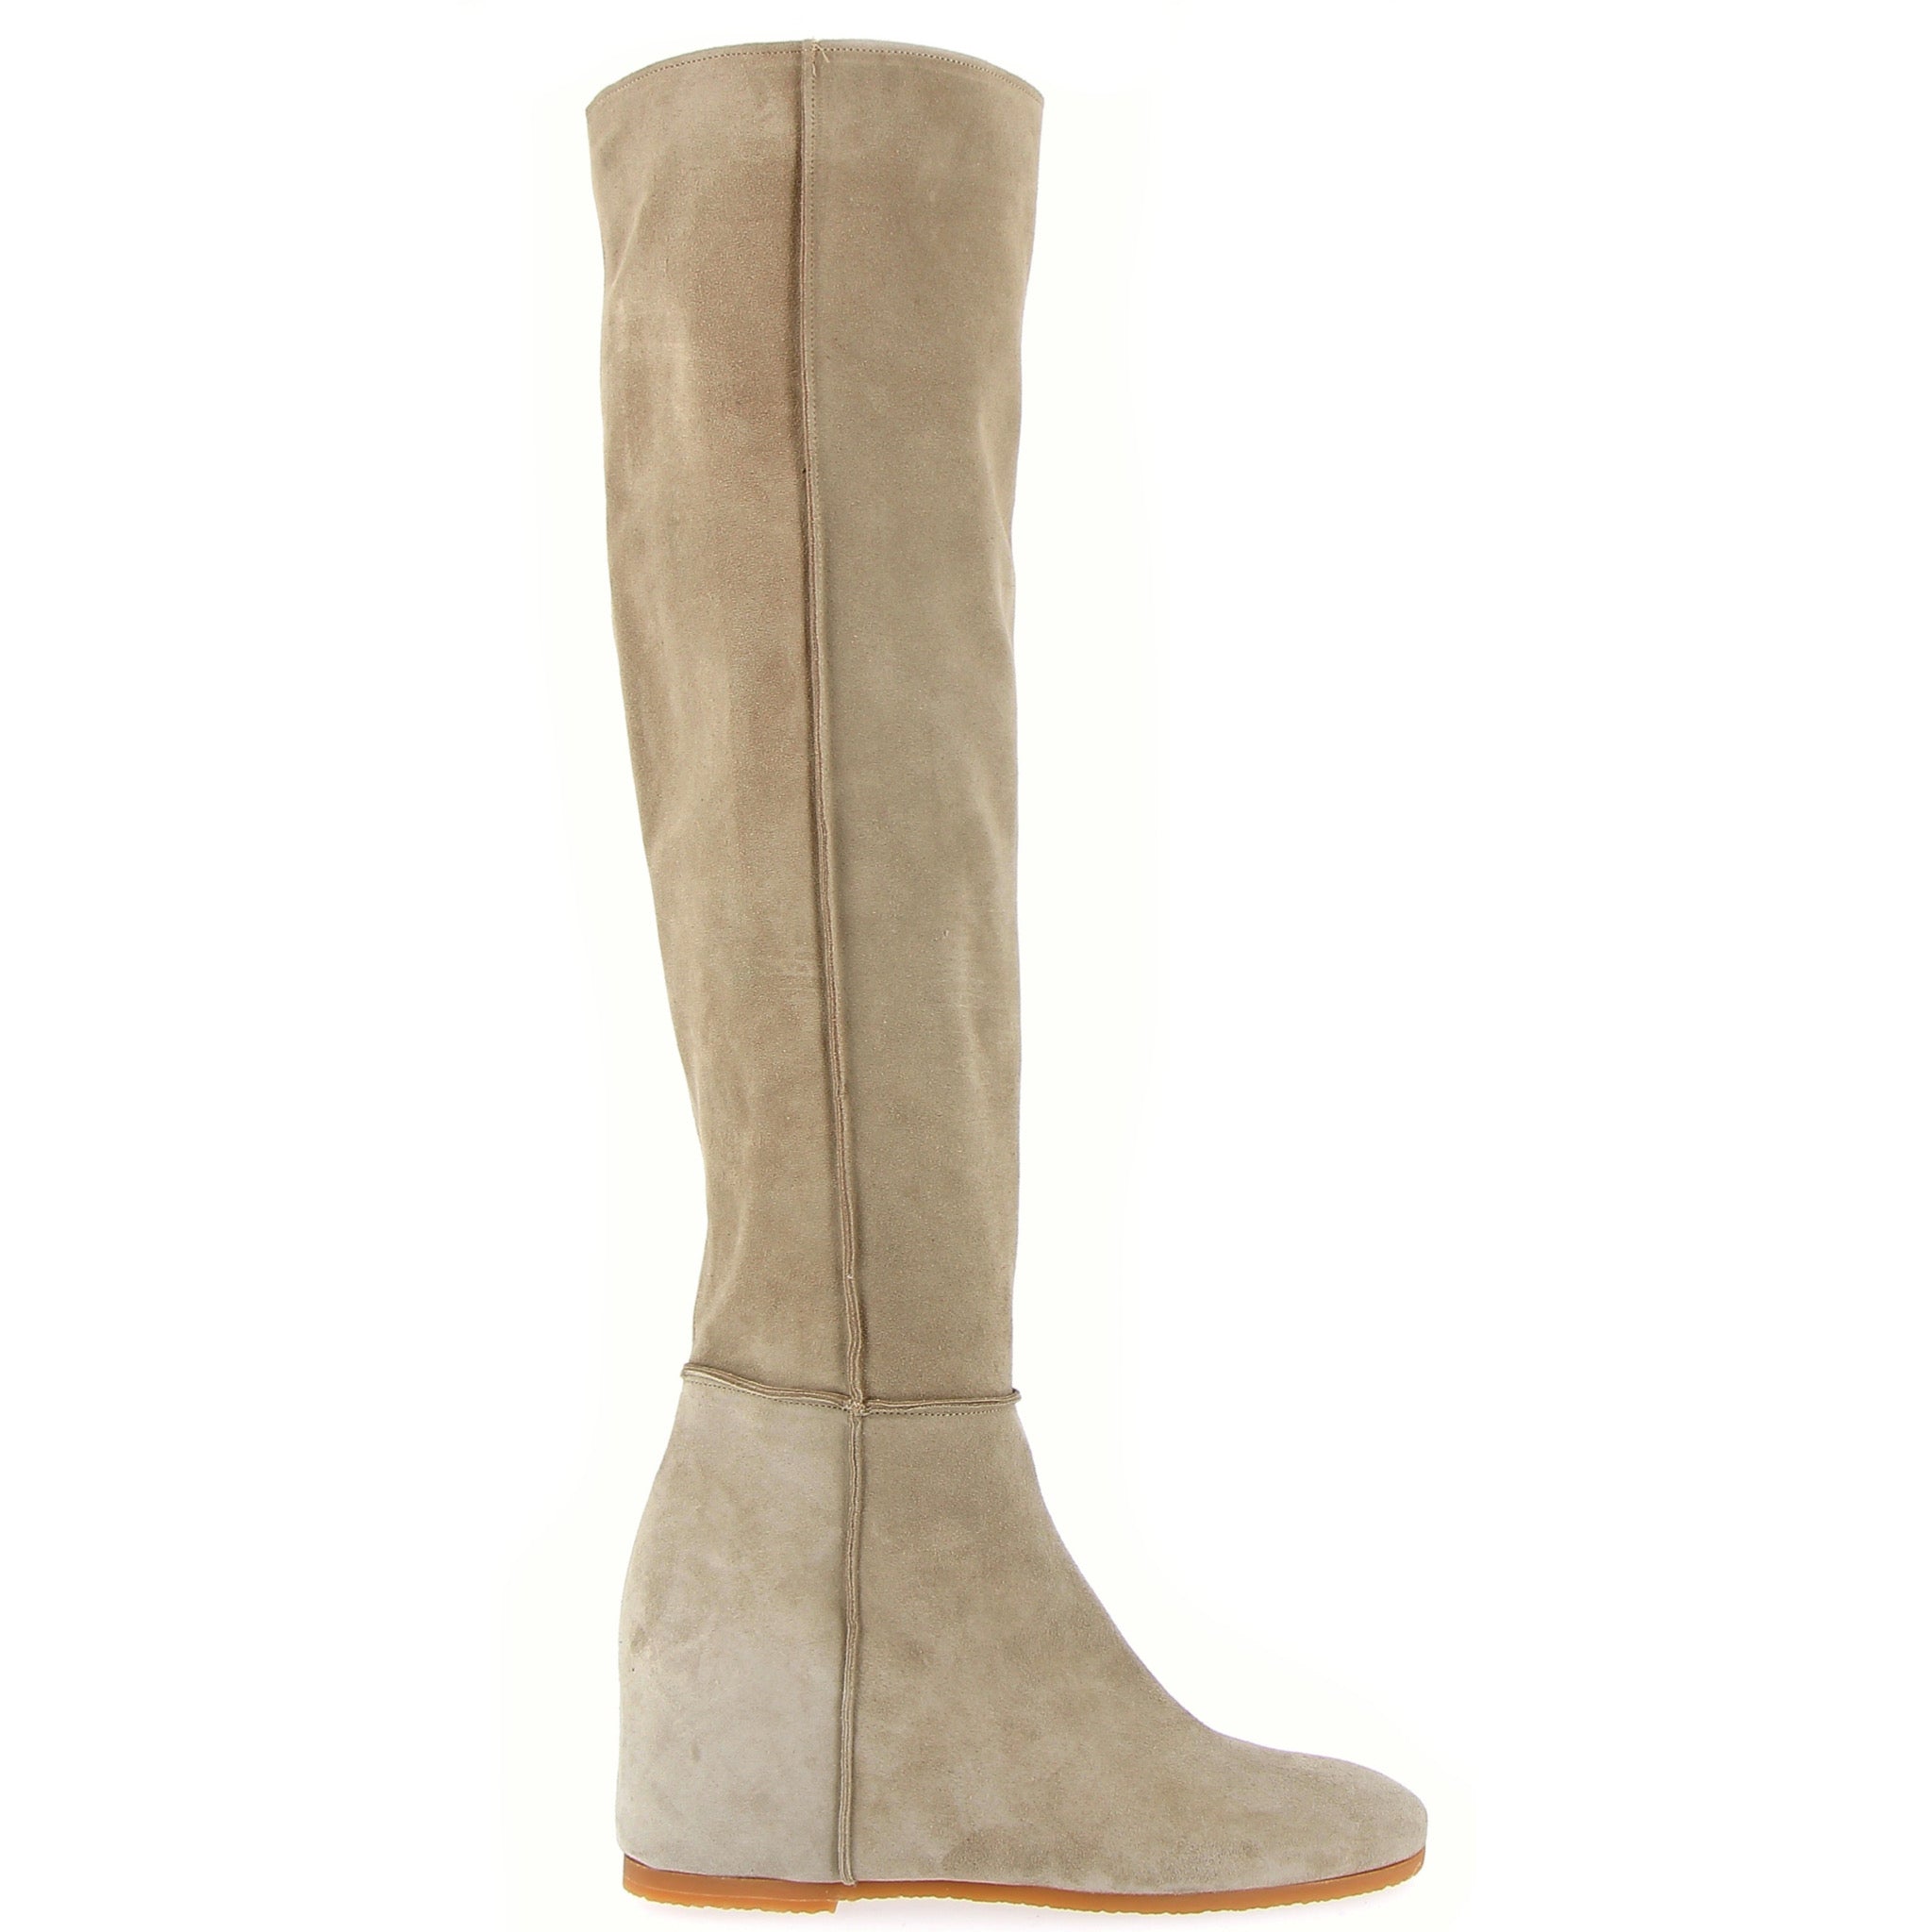 Boot in sand-colored suede with internal wedge